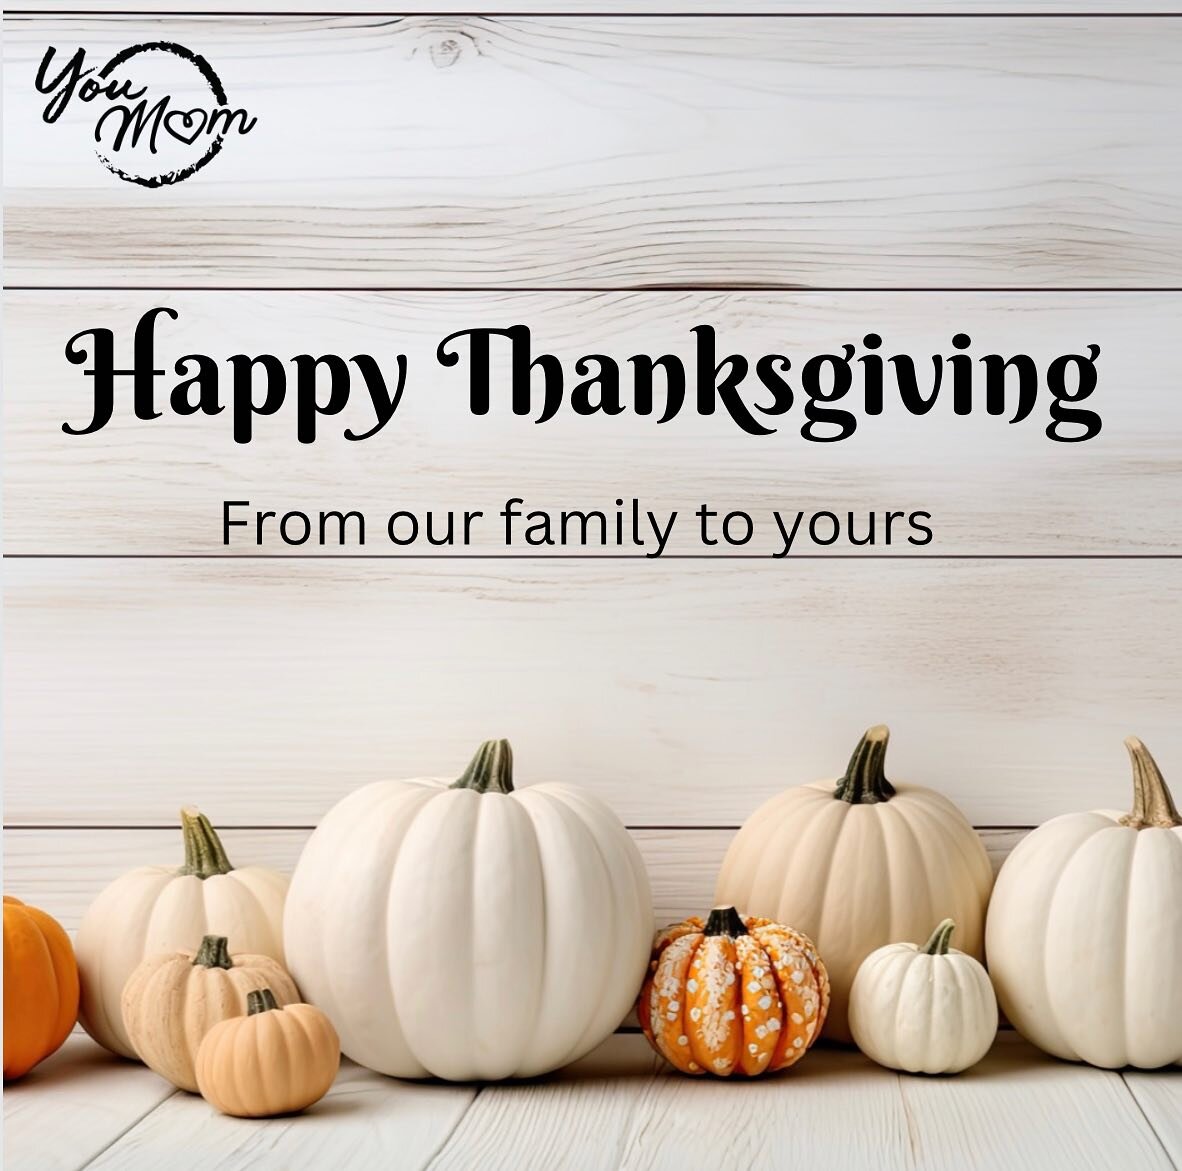 Wishing you and your family a happy and safe Thanksgiving! #hopeforher #youmom #grateful